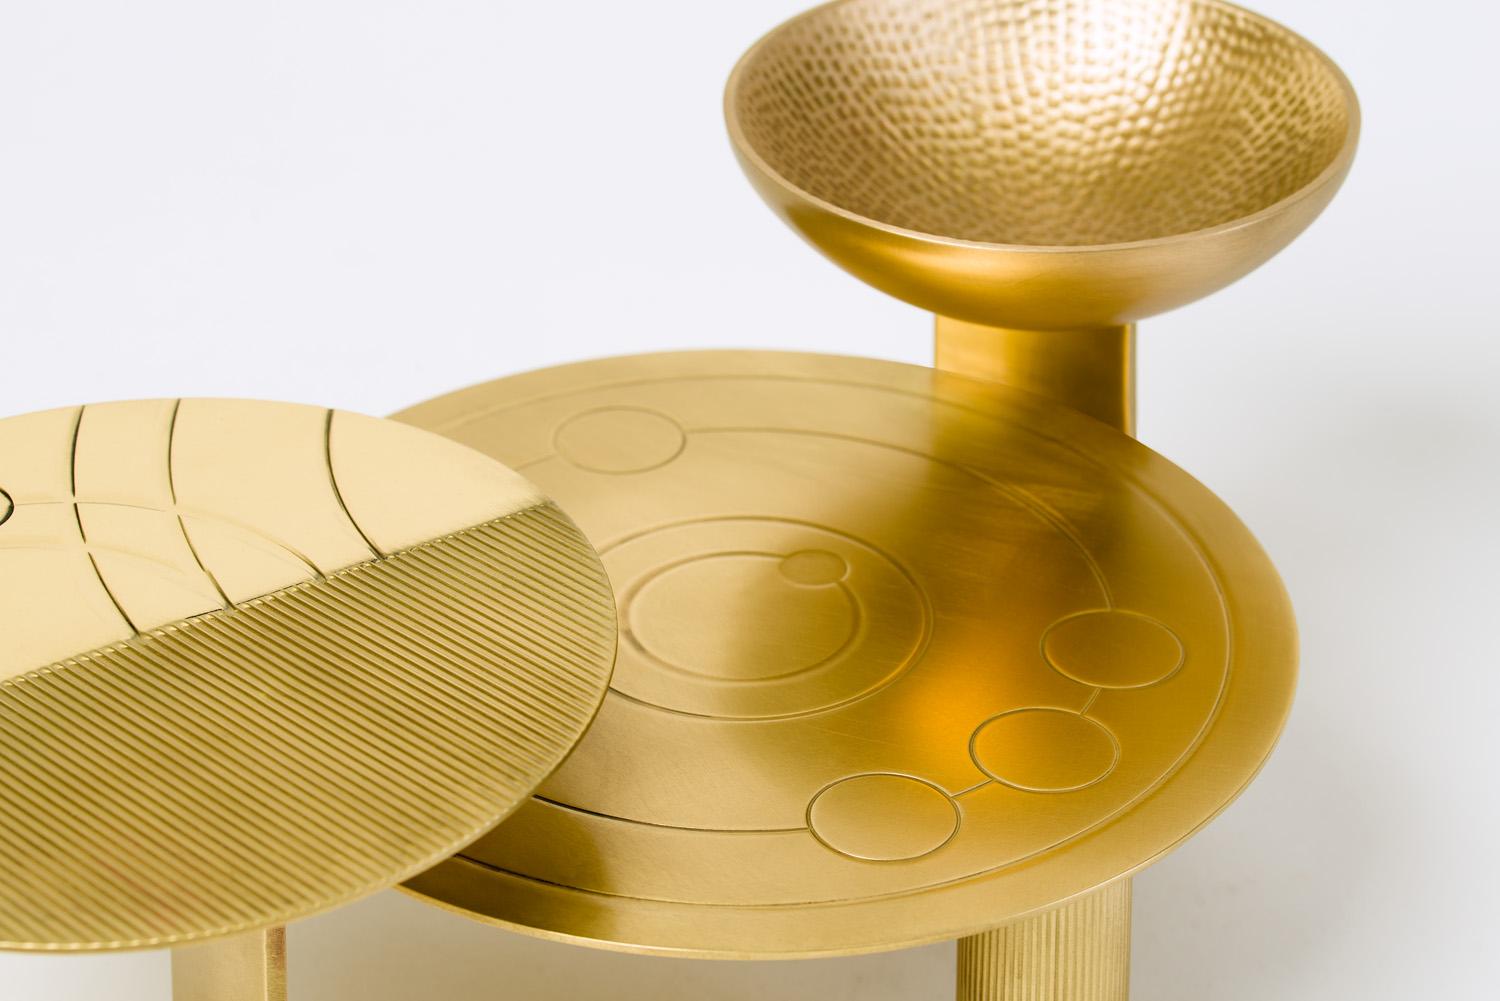 Equinox Centerpiece  is a family of candleholder and centerpieces playing with volumes, textures and graphic elements, designed by Day Studio for GAIA&GINO.  Day Studio fuses astronomy inspired drawings impeccably milled on surfaces with handmade